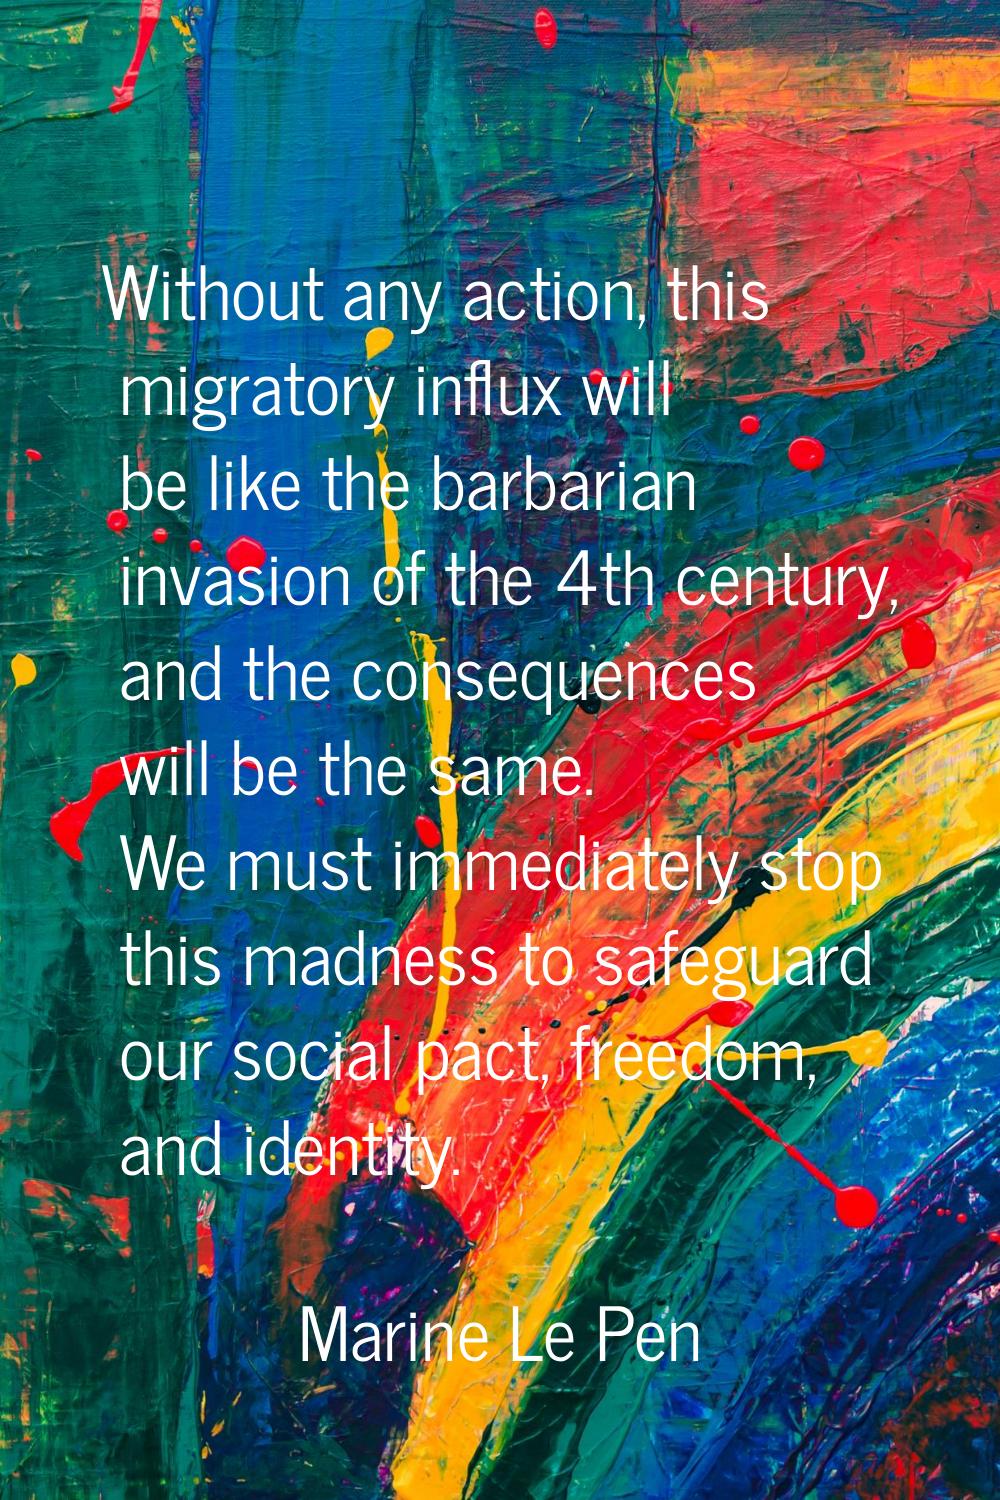 Without any action, this migratory influx will be like the barbarian invasion of the 4th century, a